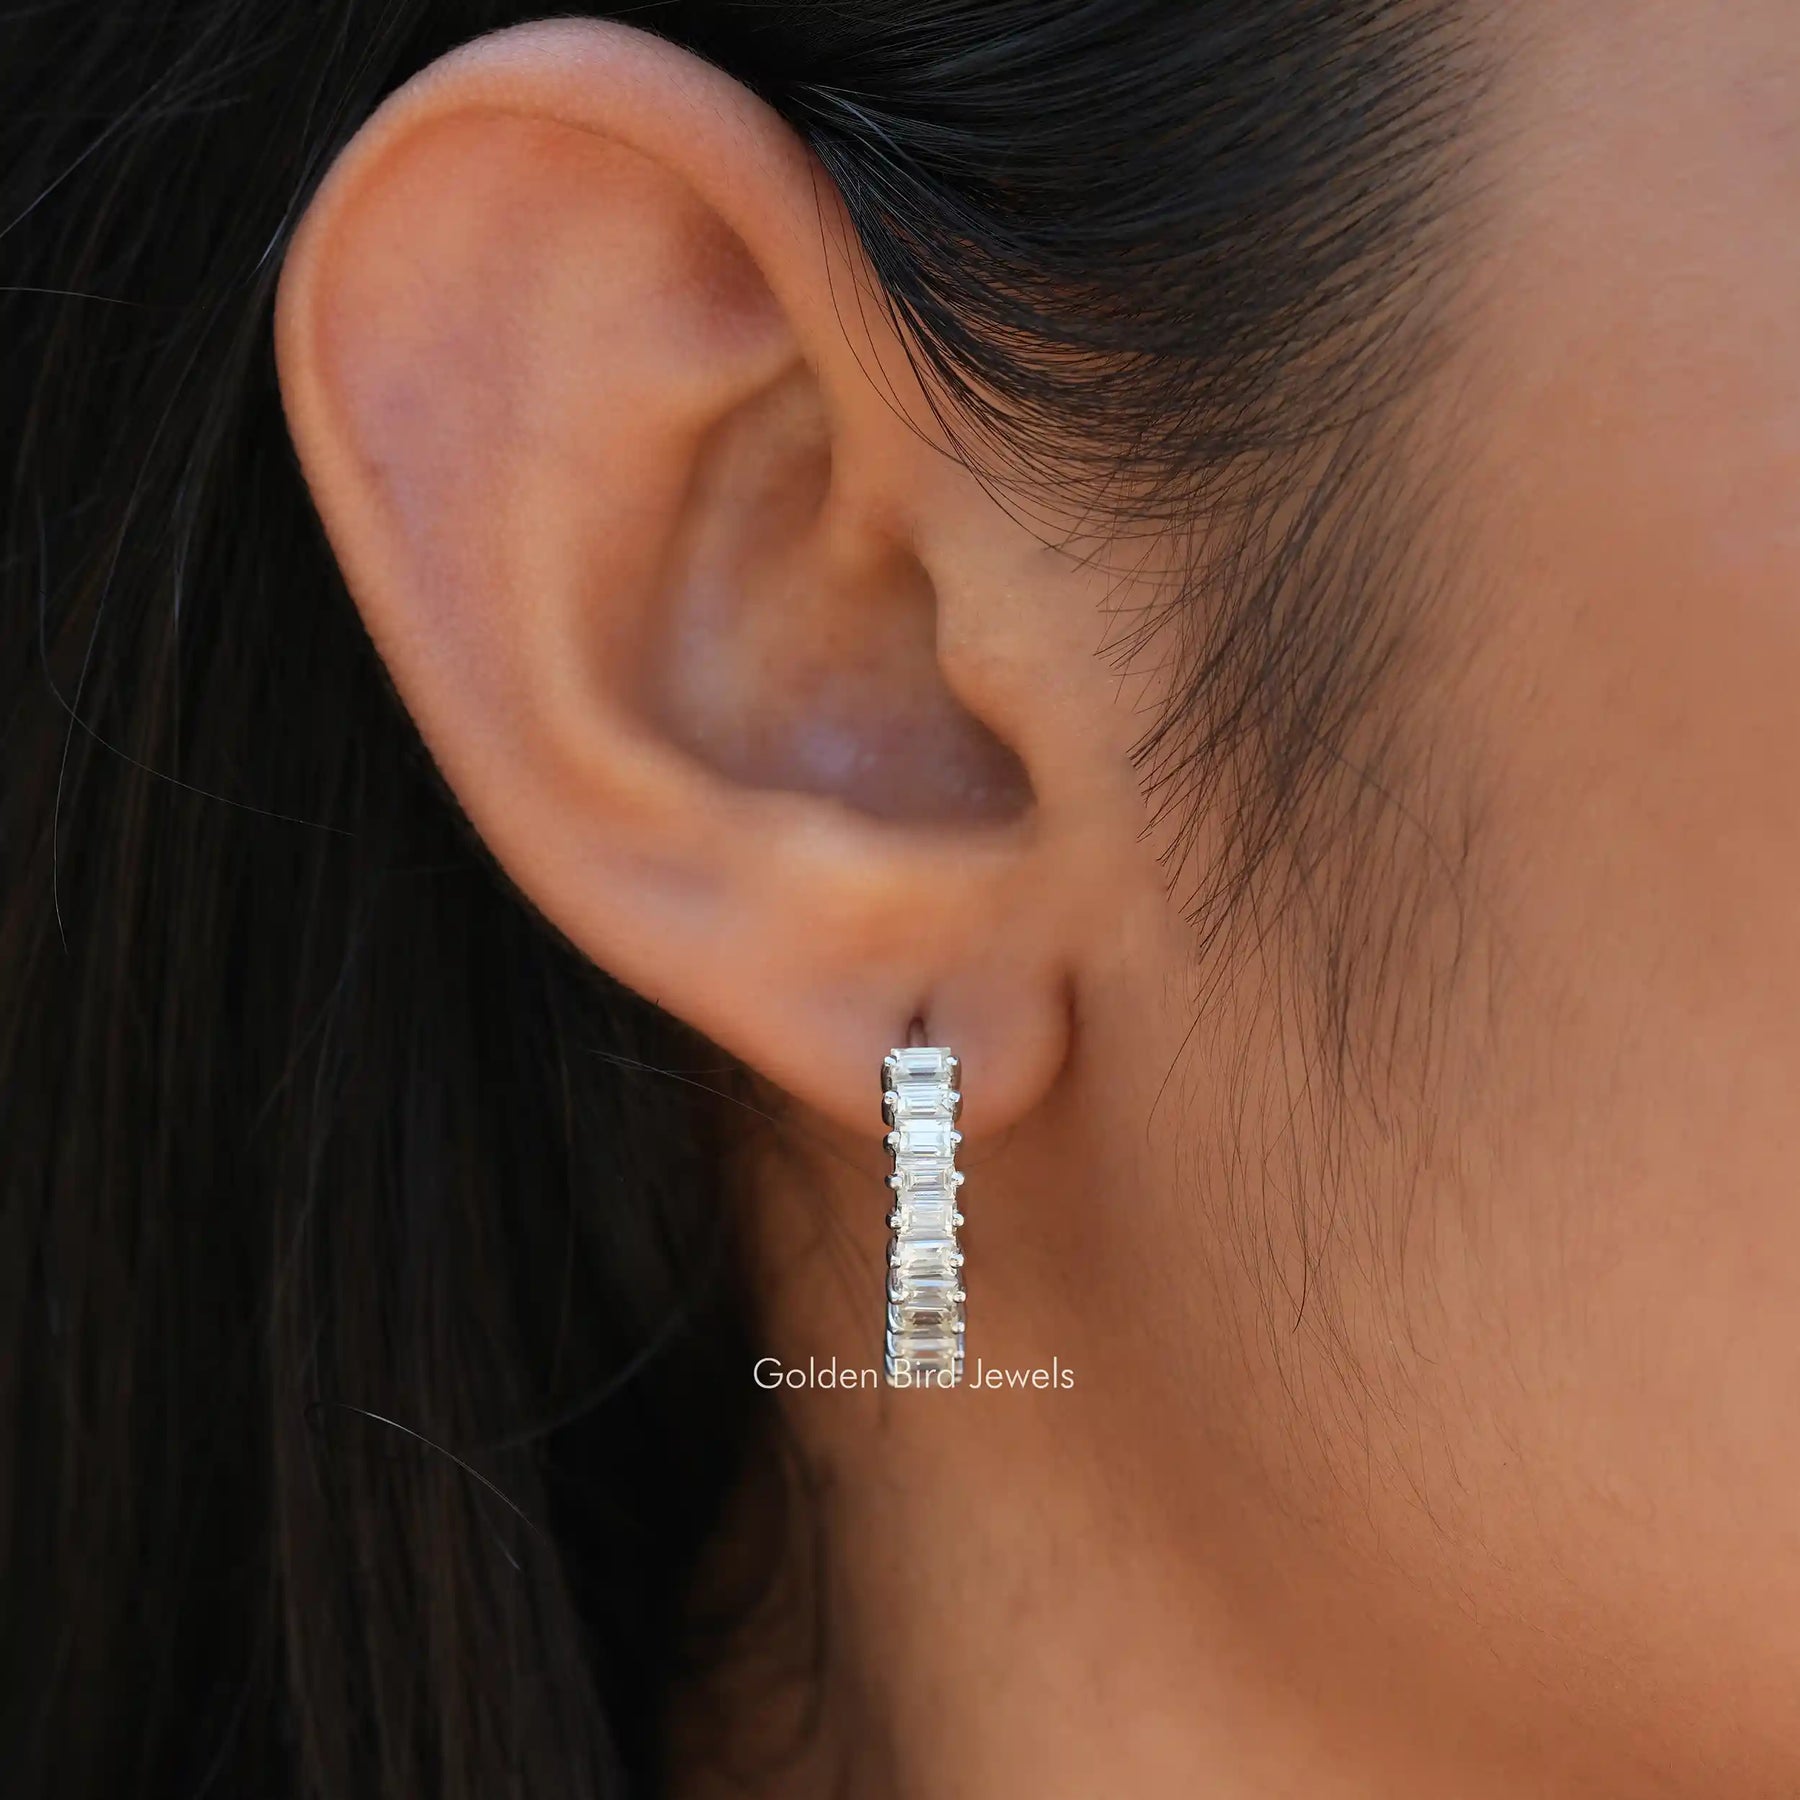 [This earrings made of vvs clarity and white gold]-[Golden Bird Jewels]